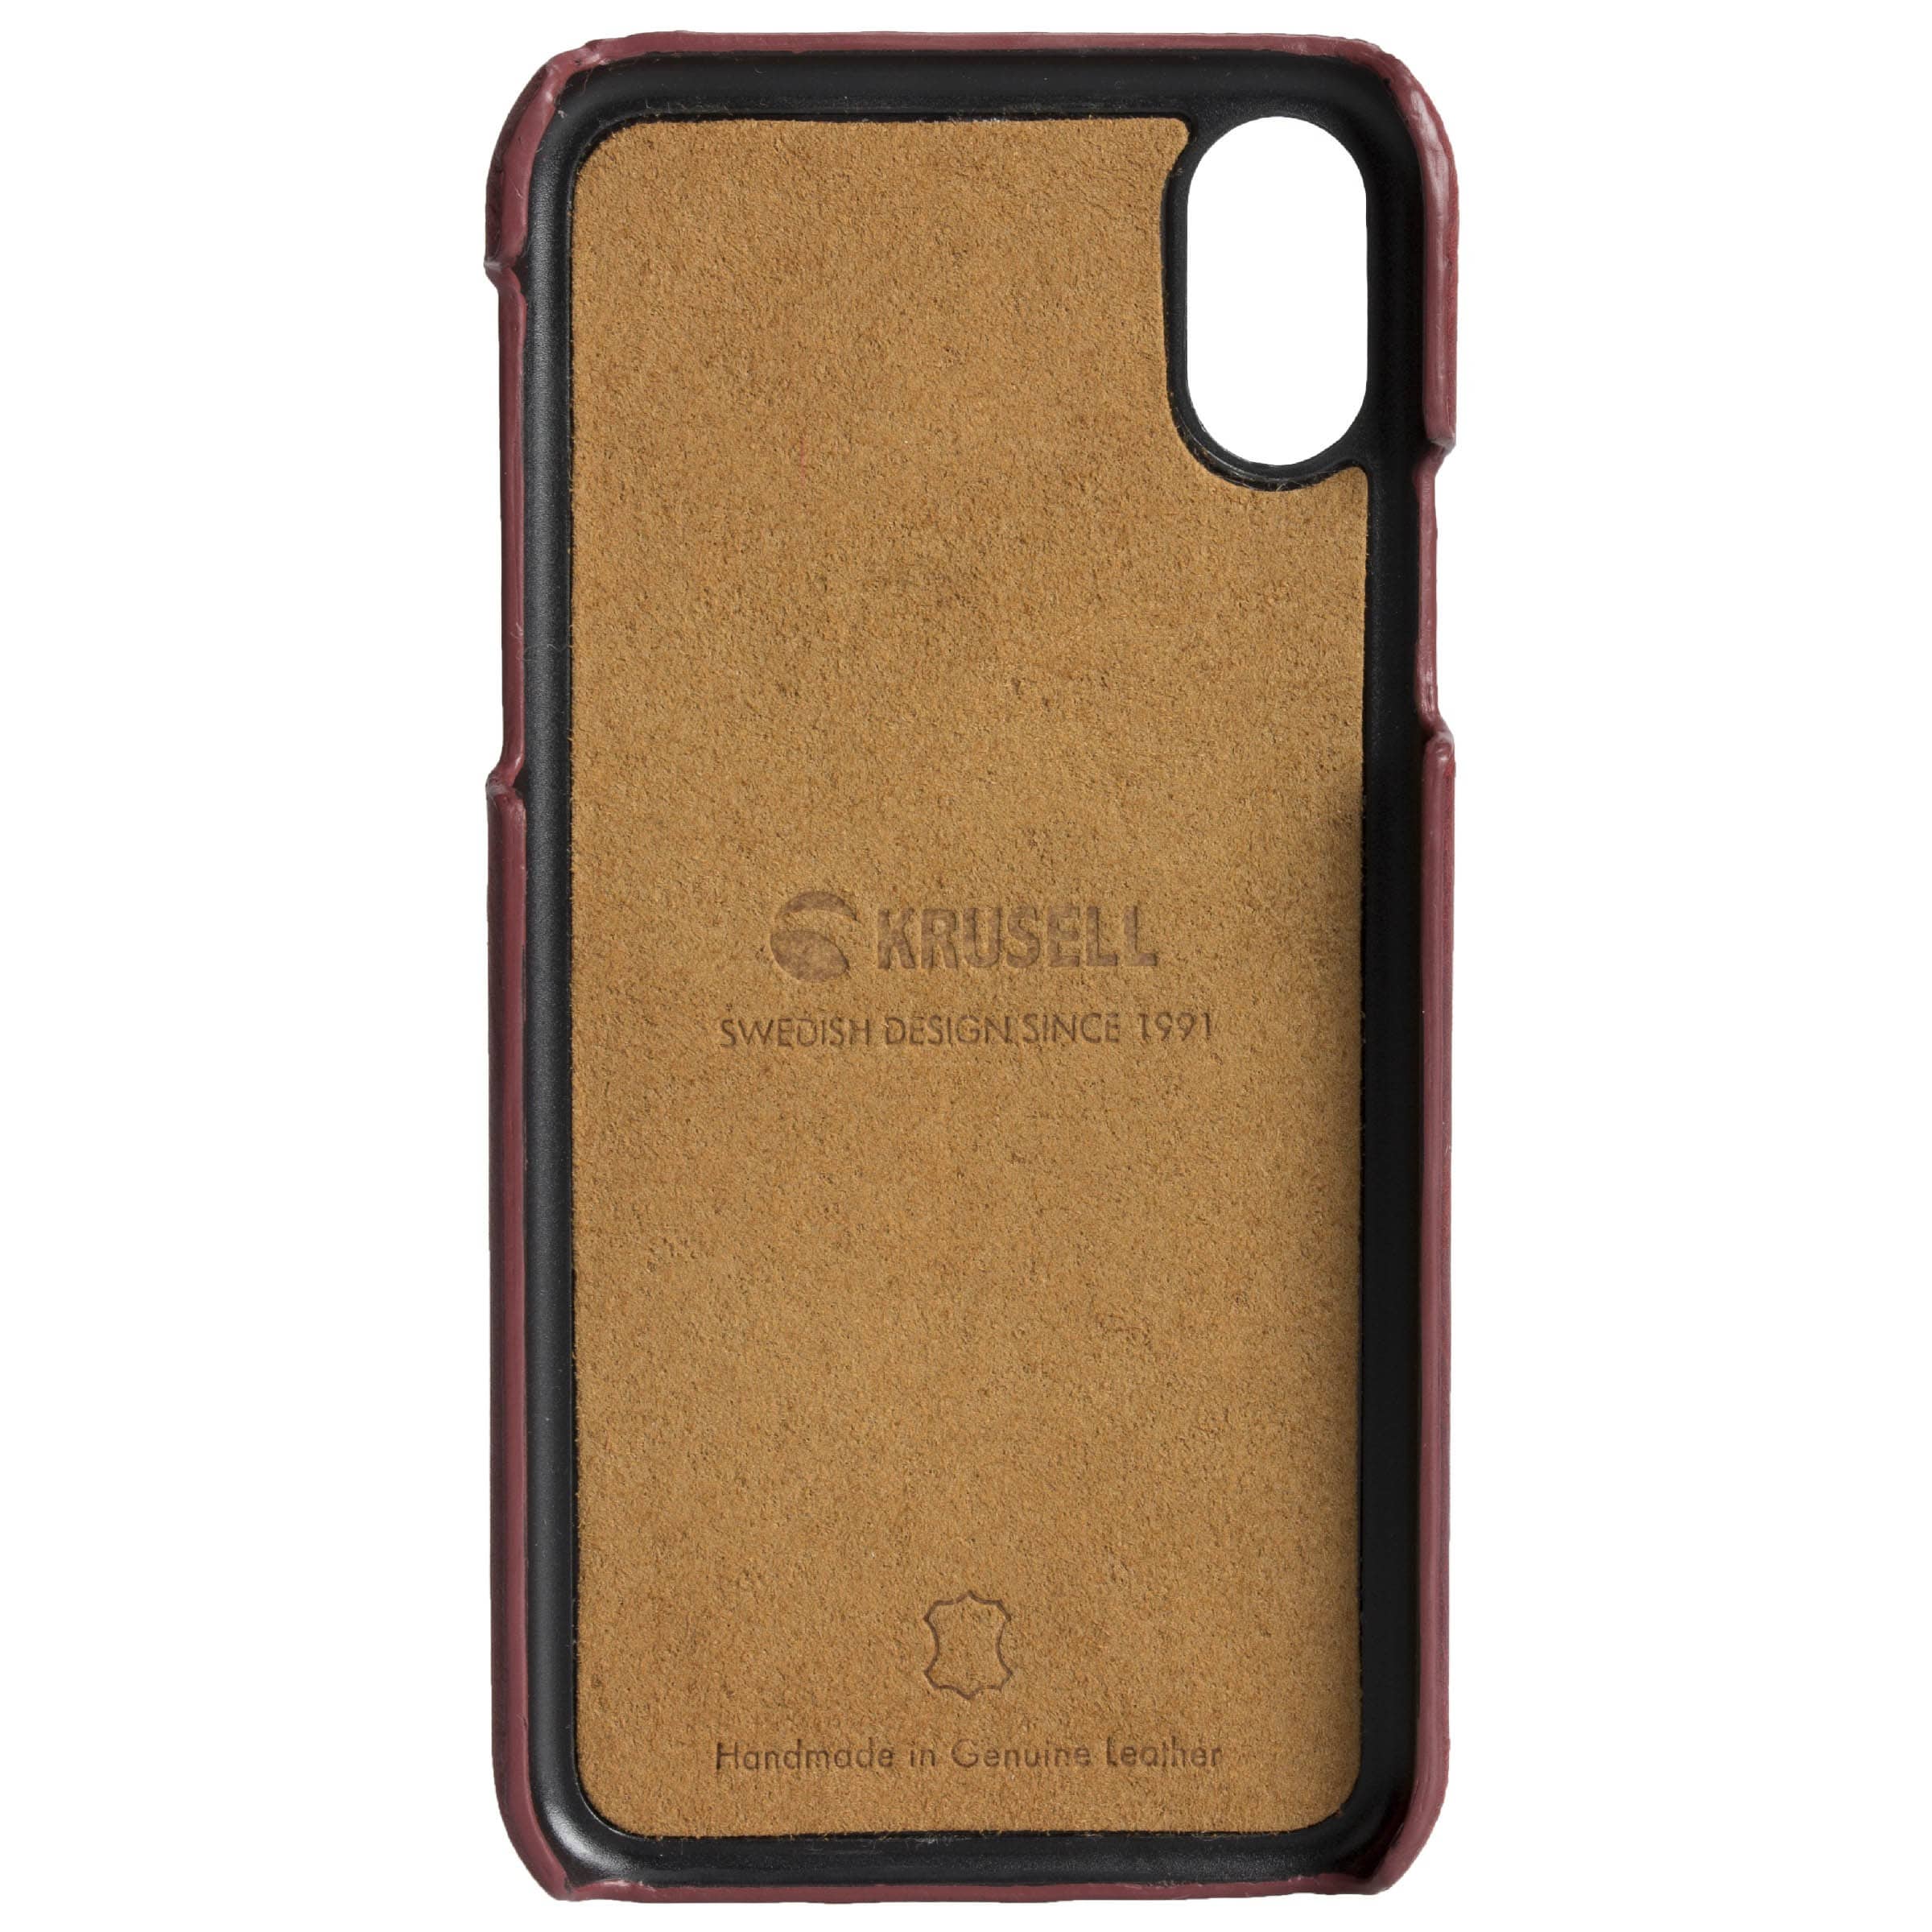 Krusell Sunne 2 Card Cover iPhone XS Max - Vintage Red